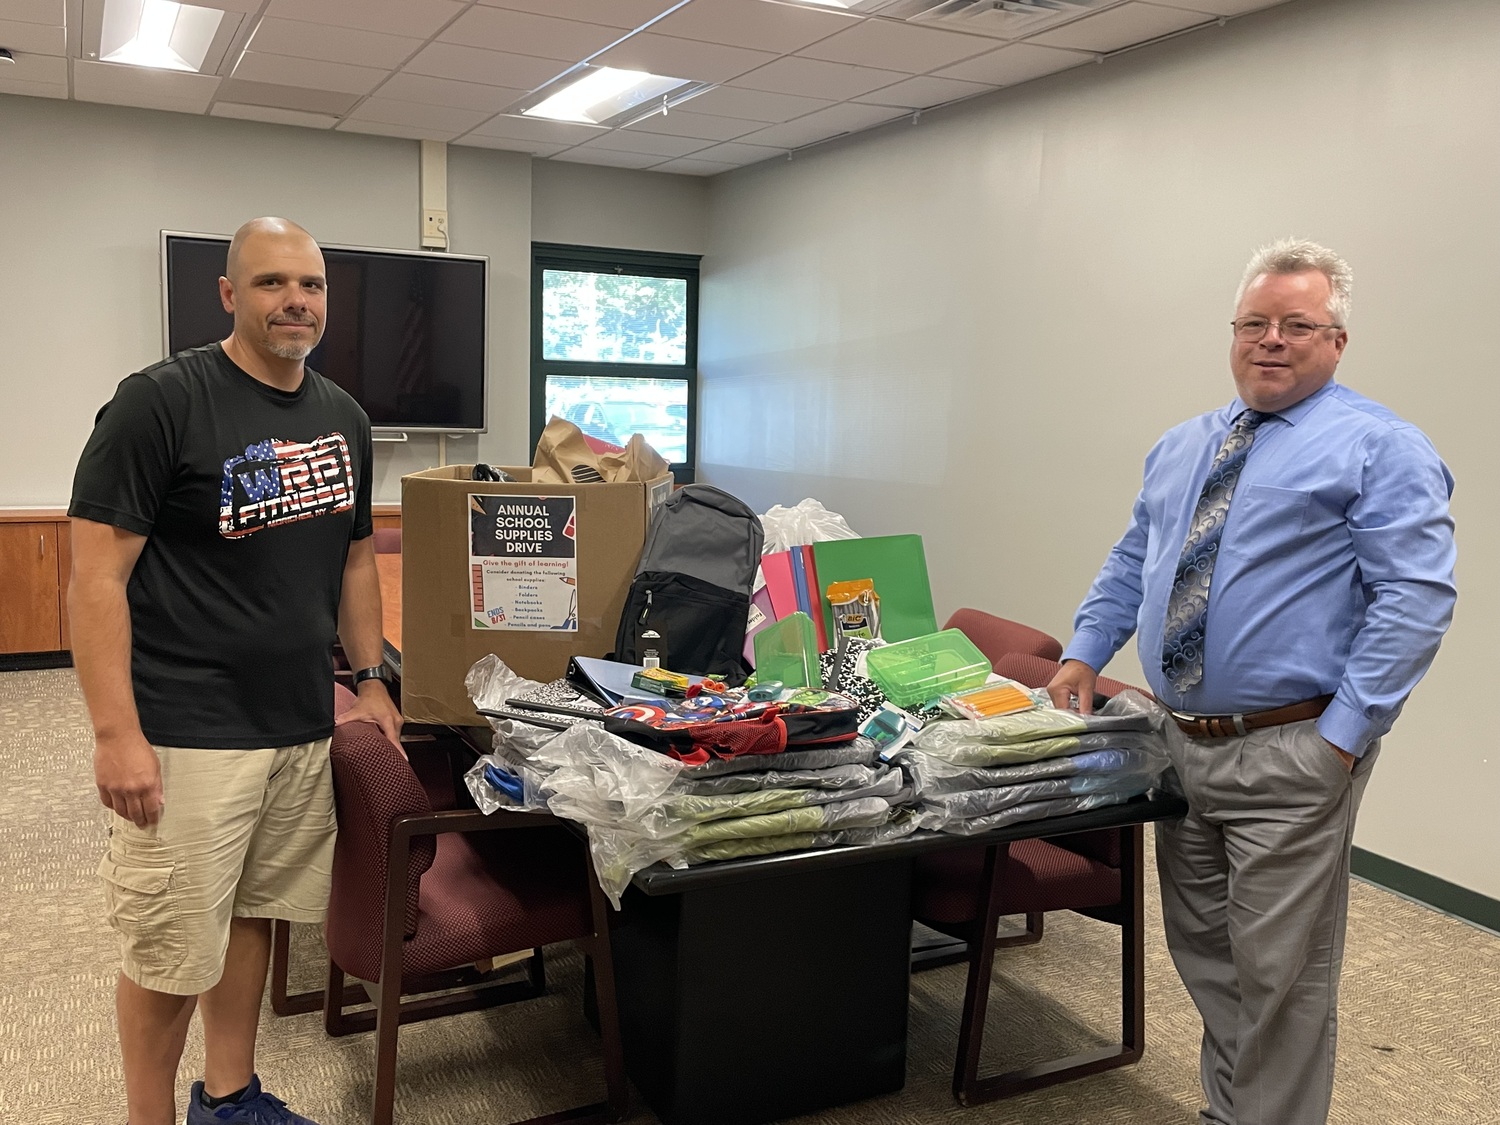 WRP Fitness member Bruce Bentley collected donations of school supplies for students at Eastport-South Manor Central School District, which he recently presented to Superintendent of Schools Joseph Steimel. The donation included folders, binders, loose leaf paper, composition books, spiral notebooks, backpacks, crayons, colored pencils, markers, pencils, pens, erasers, scissors, rulers, Post-It notes and index cards. COURTESY EASTPORT-SOUTH MANOR SCHOOL DISTRICT